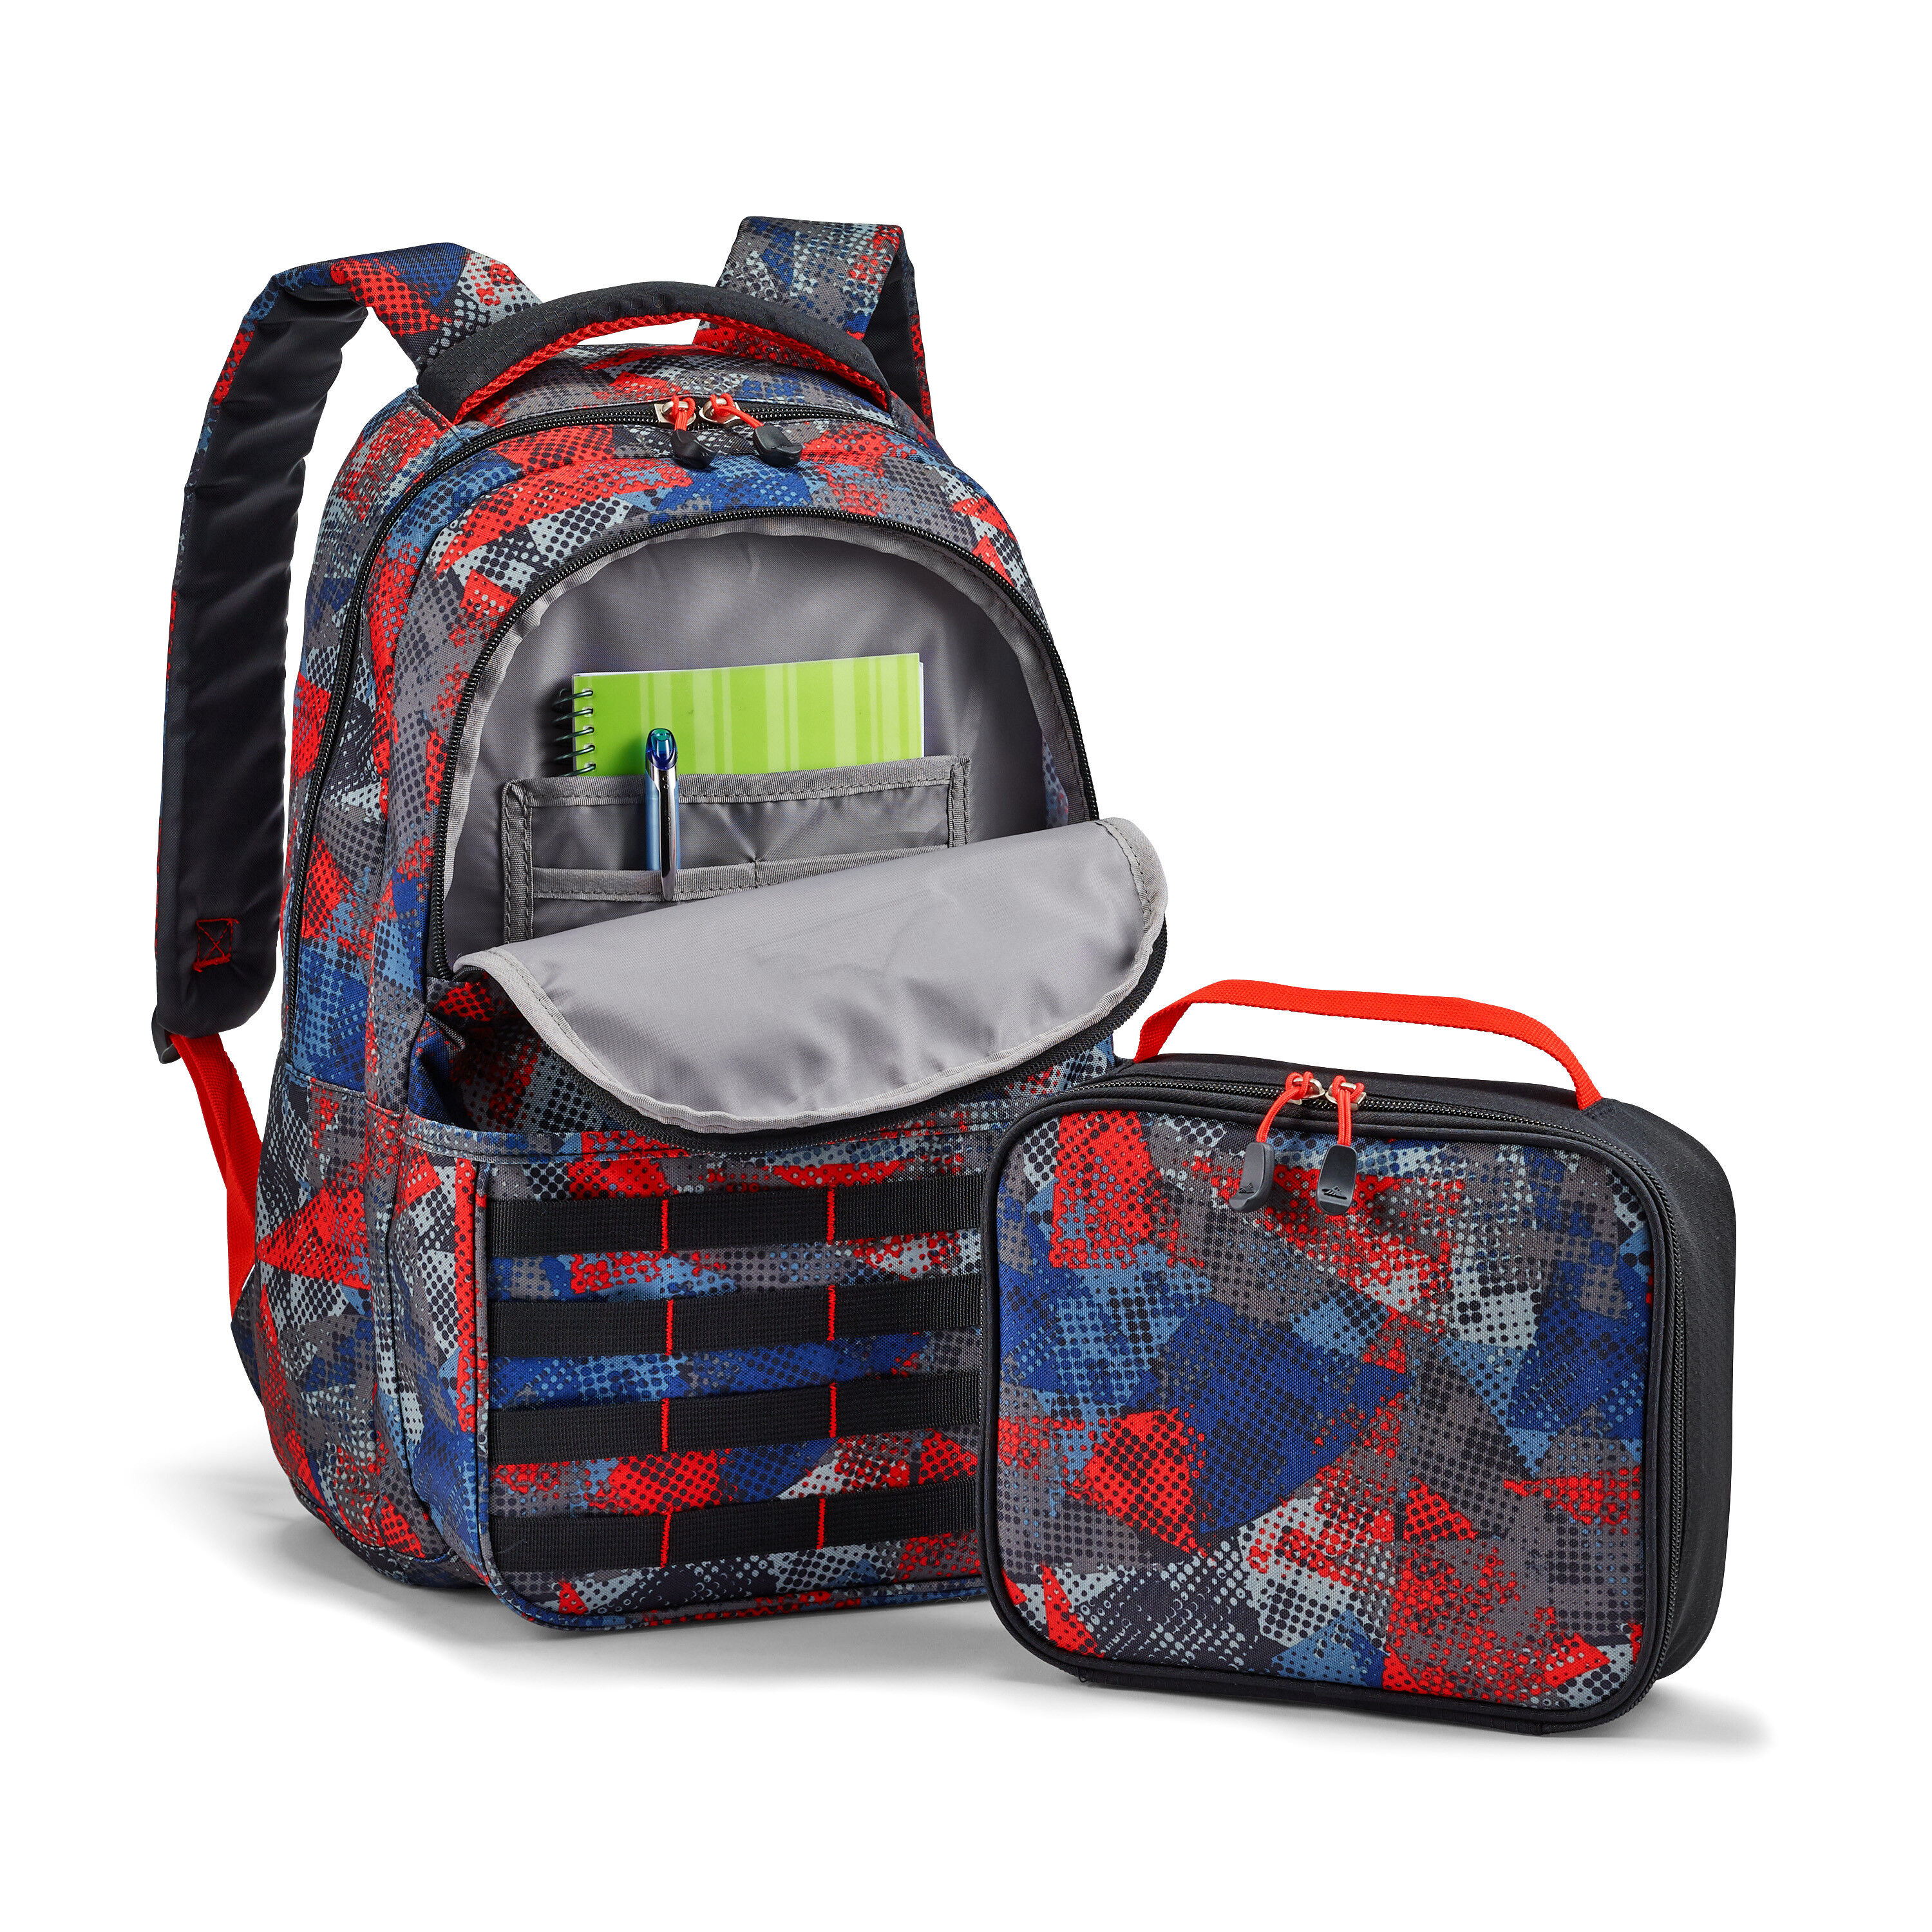 Under Armour - Boys Select Backpack Kids Backpack